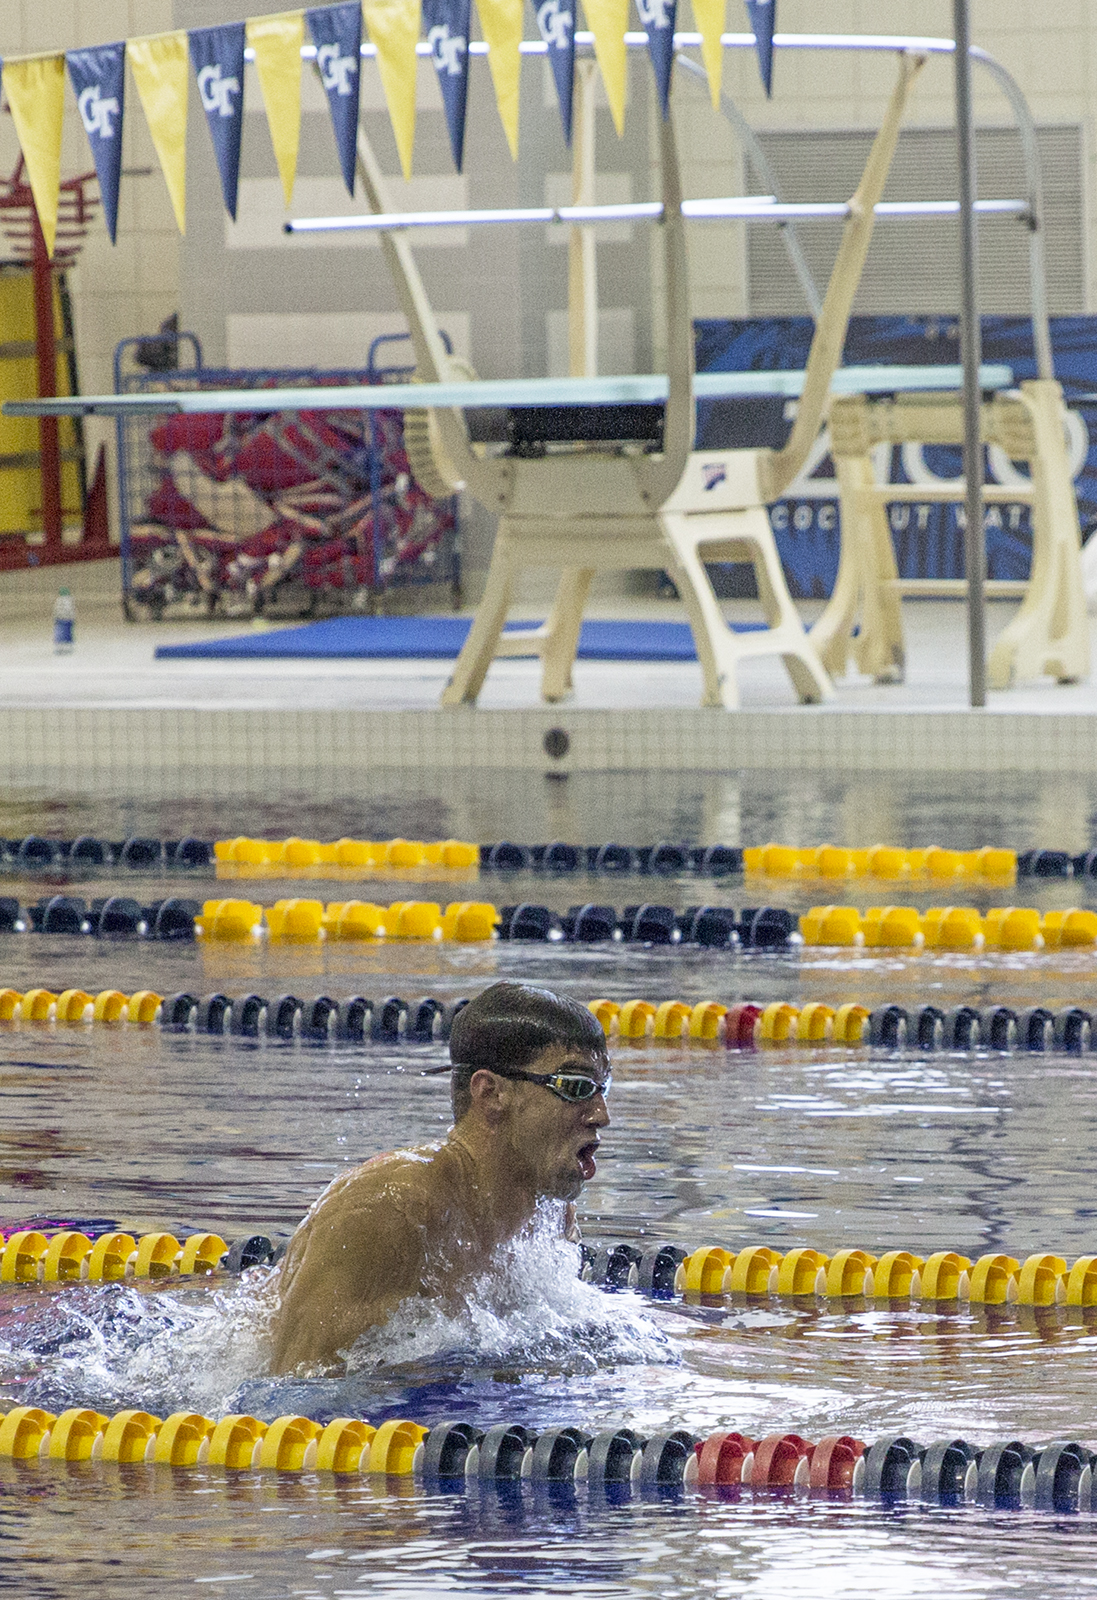 Michael Phelps practices at Georgia Tech's McAuley Aquatic Center on July 30, 2016